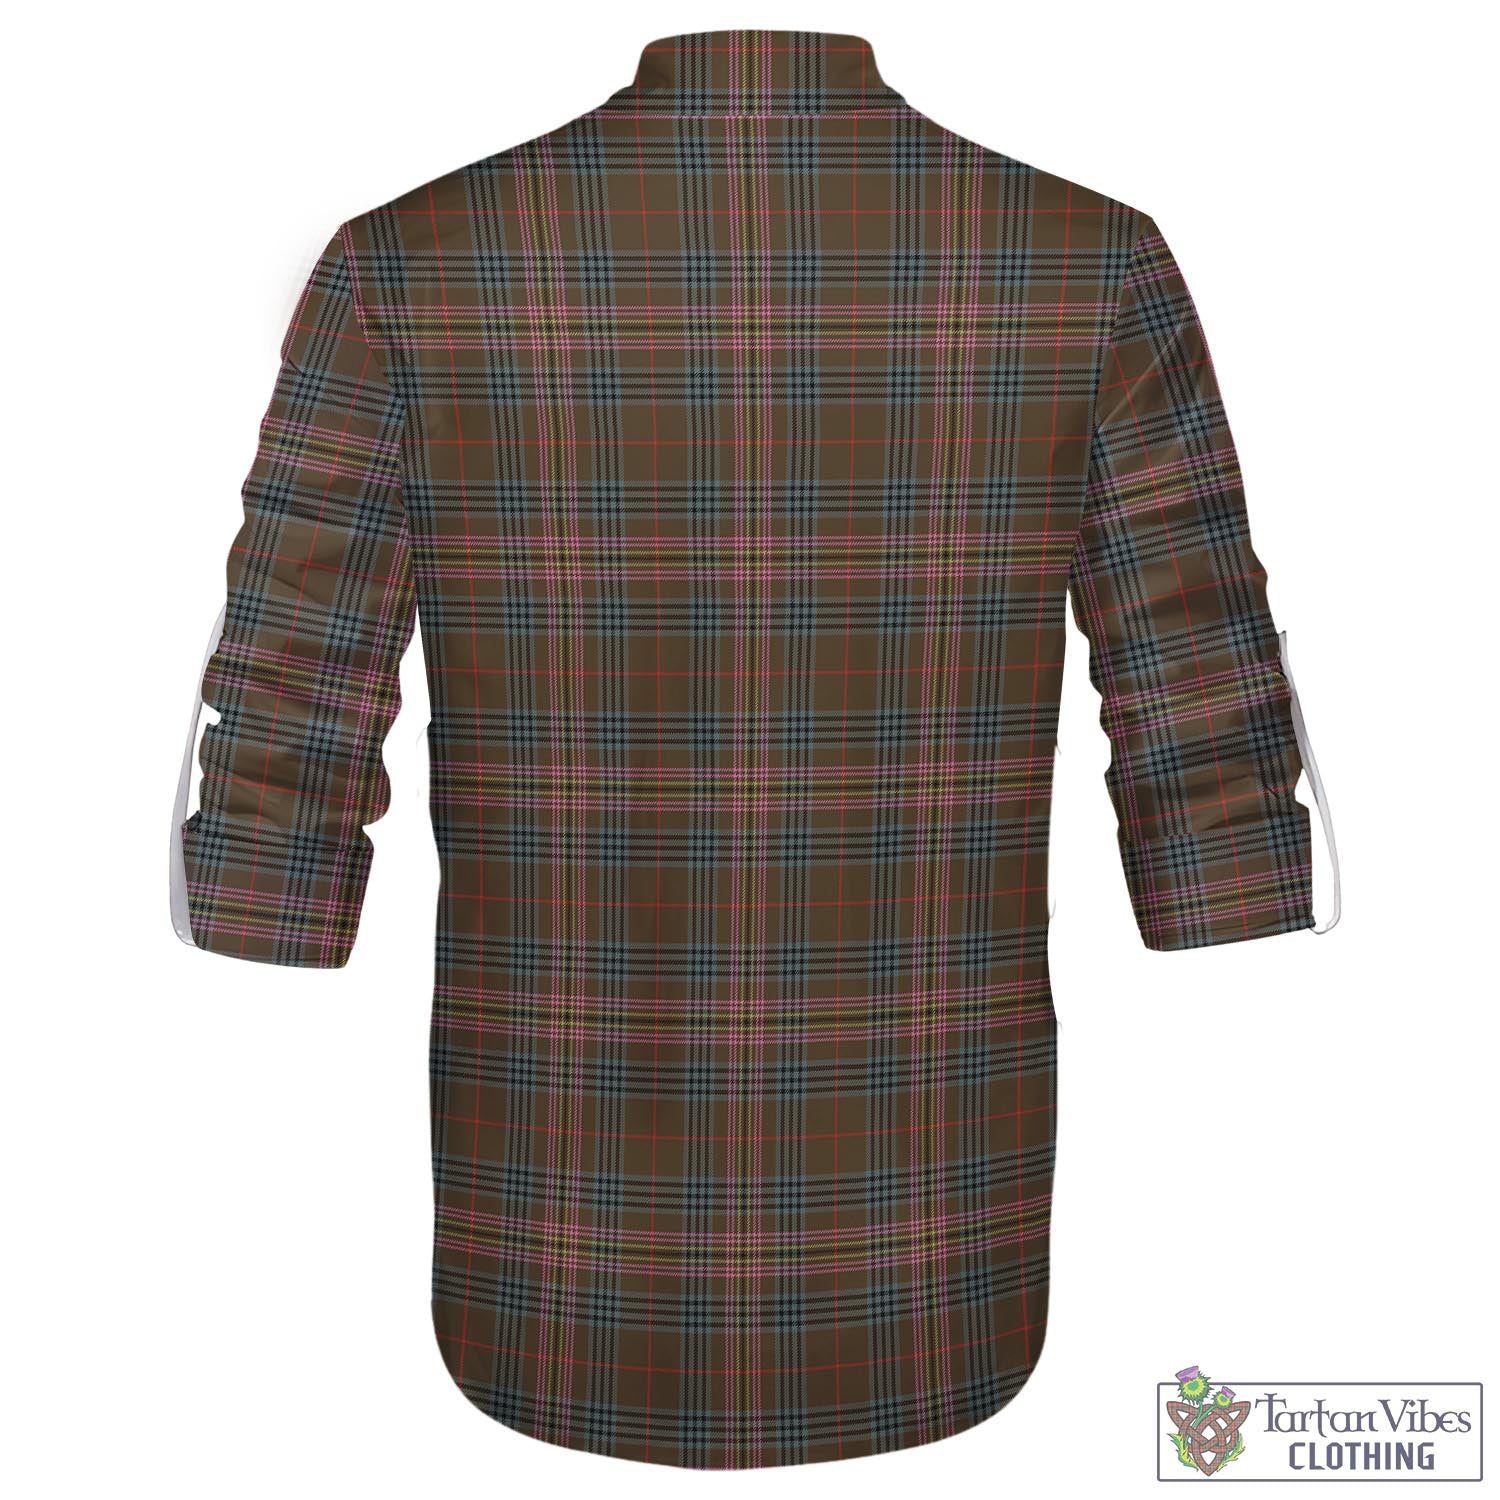 Tartan Vibes Clothing Kennedy Weathered Tartan Men's Scottish Traditional Jacobite Ghillie Kilt Shirt with Family Crest